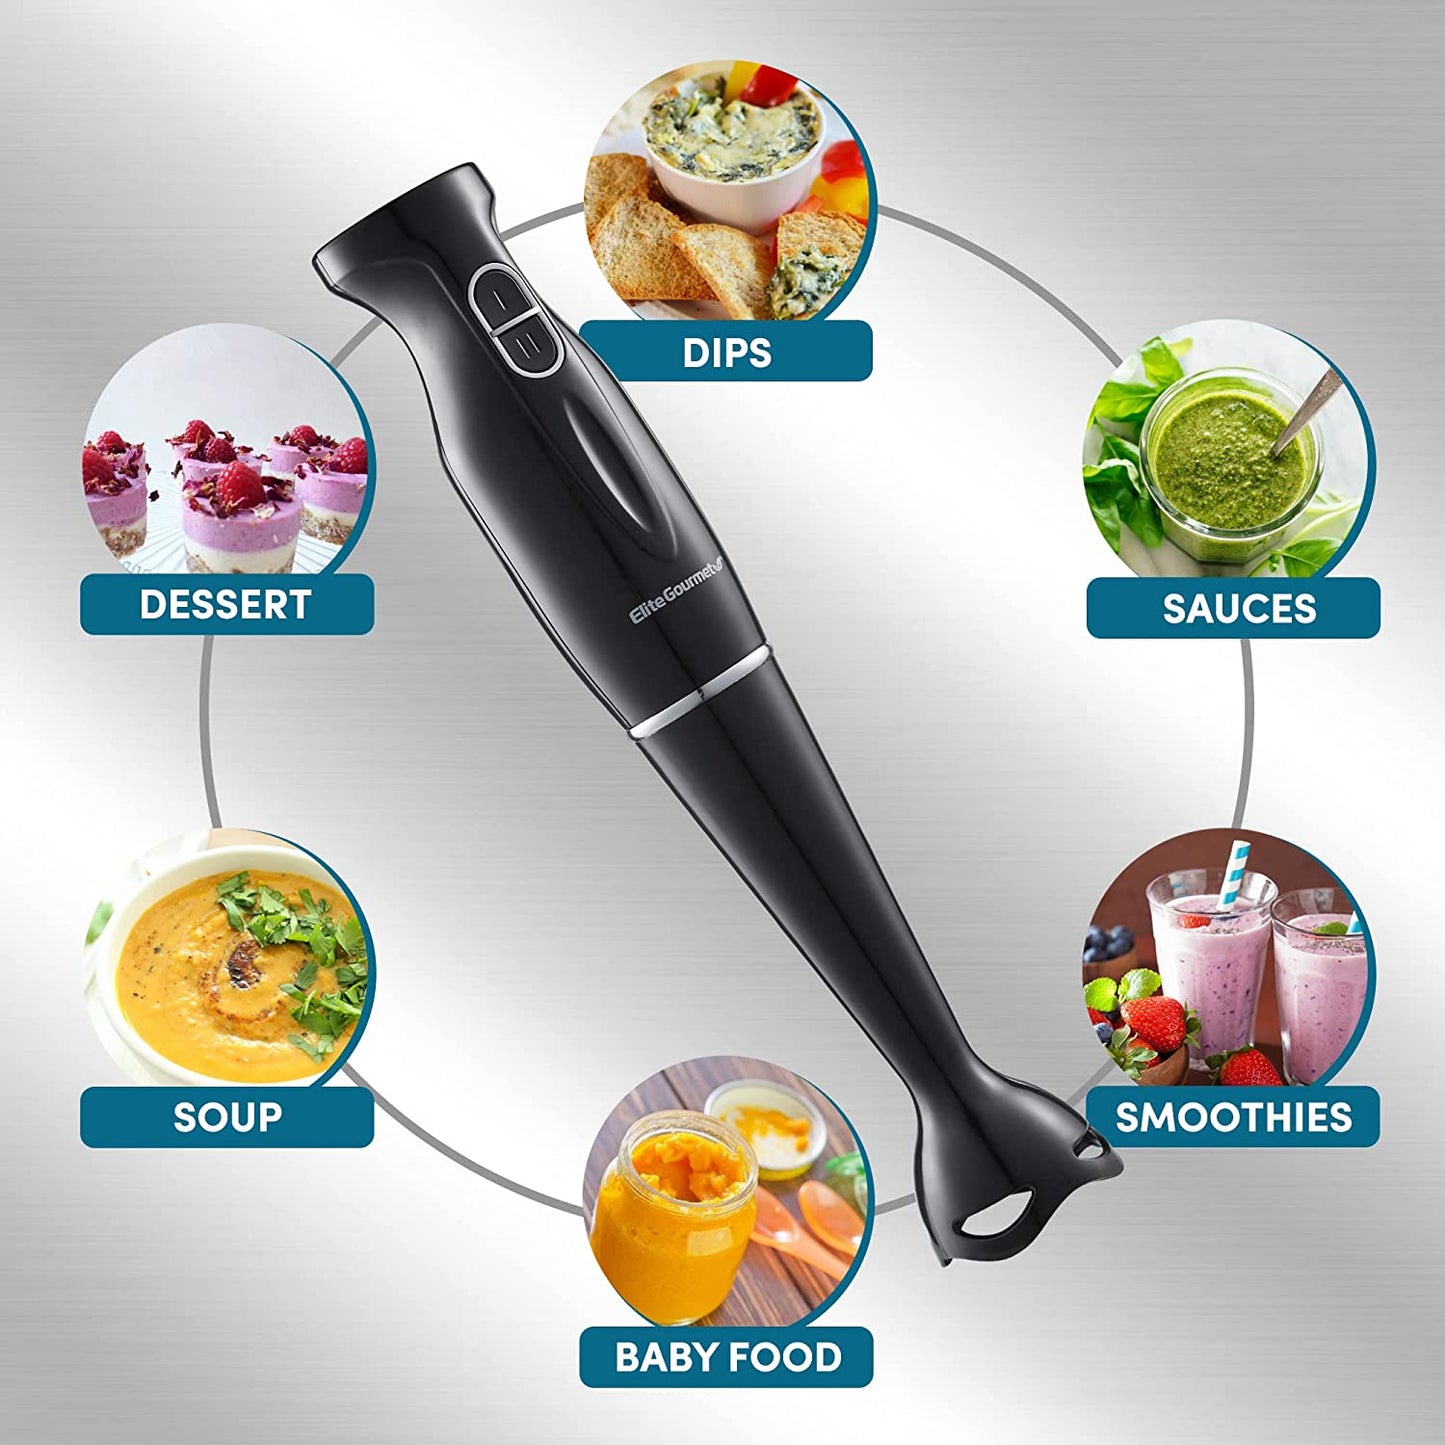 Elite Gourmet EHB1023 Immersion Hand Blender 300 Watts 2 Speed Mixing with Detachable Blades, Detachable Wand Stick Mixer, Smoothies, Baby Food, Soup, Black  Elite Gourmet   